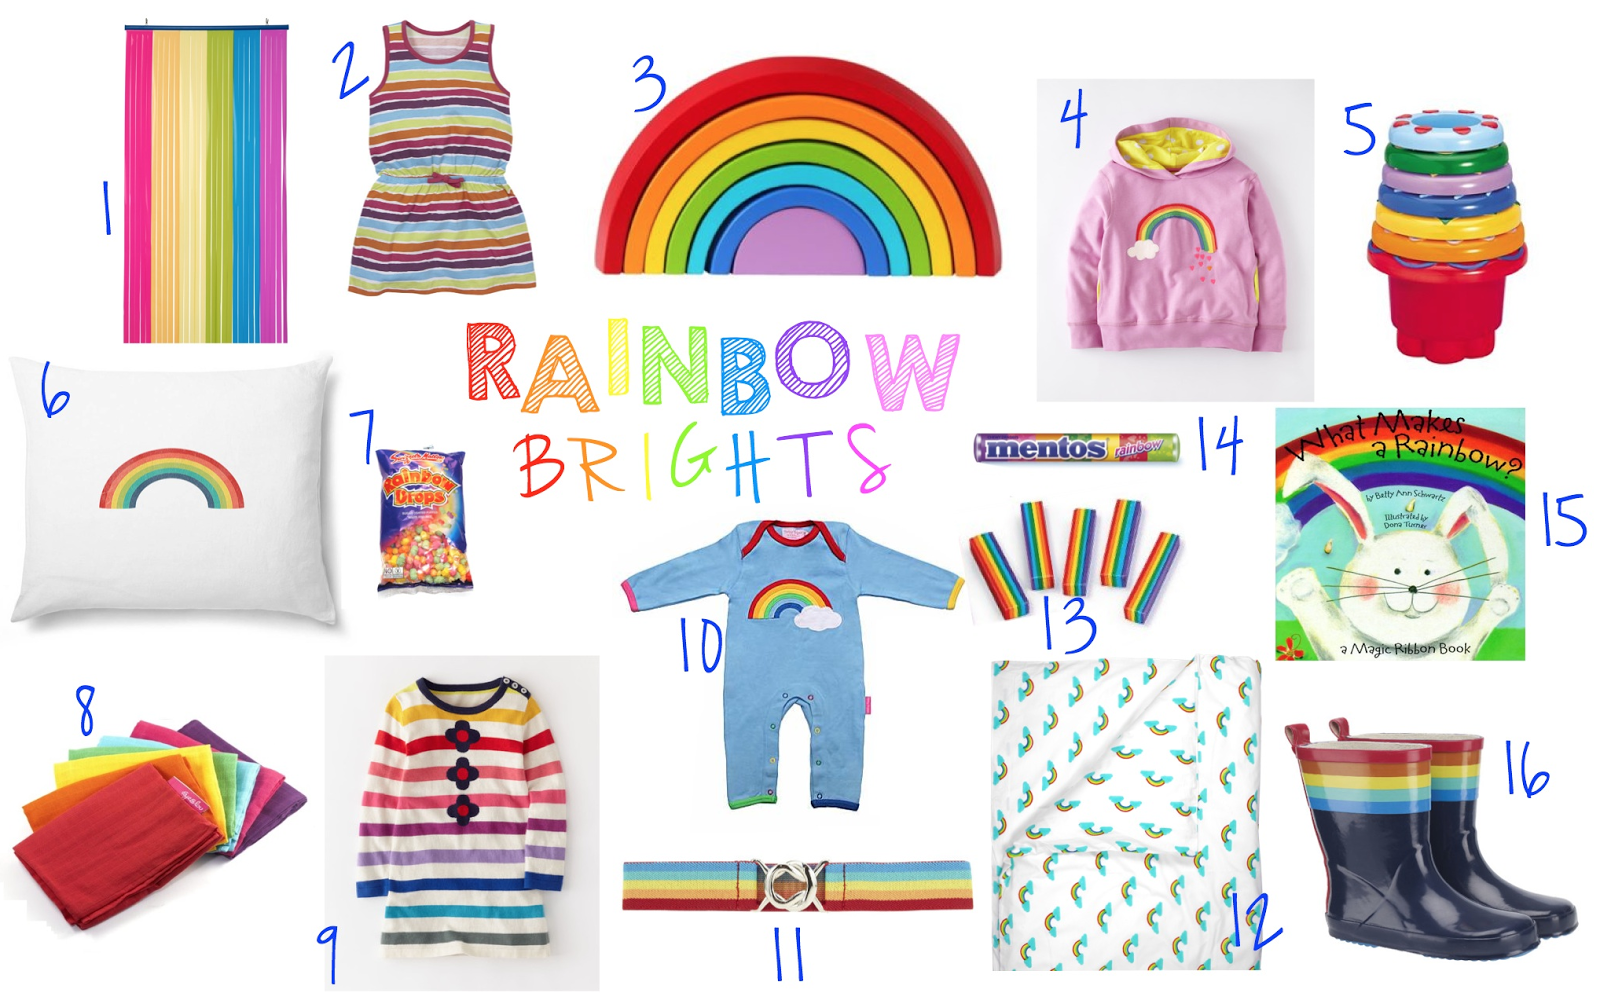 mamasVIB | V. I. BUYS: Brighten up your St Patrick's Day with these Rainbow buys…and quick DIY!, Brighten up your St Patrick's Day with these Rainbow buys…| st patricks day | rainbow buys |fashion | bode |mothercare | DIY| mamasVIb | craft | celebrations | style | kids clothes |rainbow sweets |rainbow toys | patricks day | Irish | green |rainbow | party | smarties | Sainsburys wooden toy | rainbow bedding | baby buys | gift ideas |party favours | mamasVIB | stylist | fashion editor| 